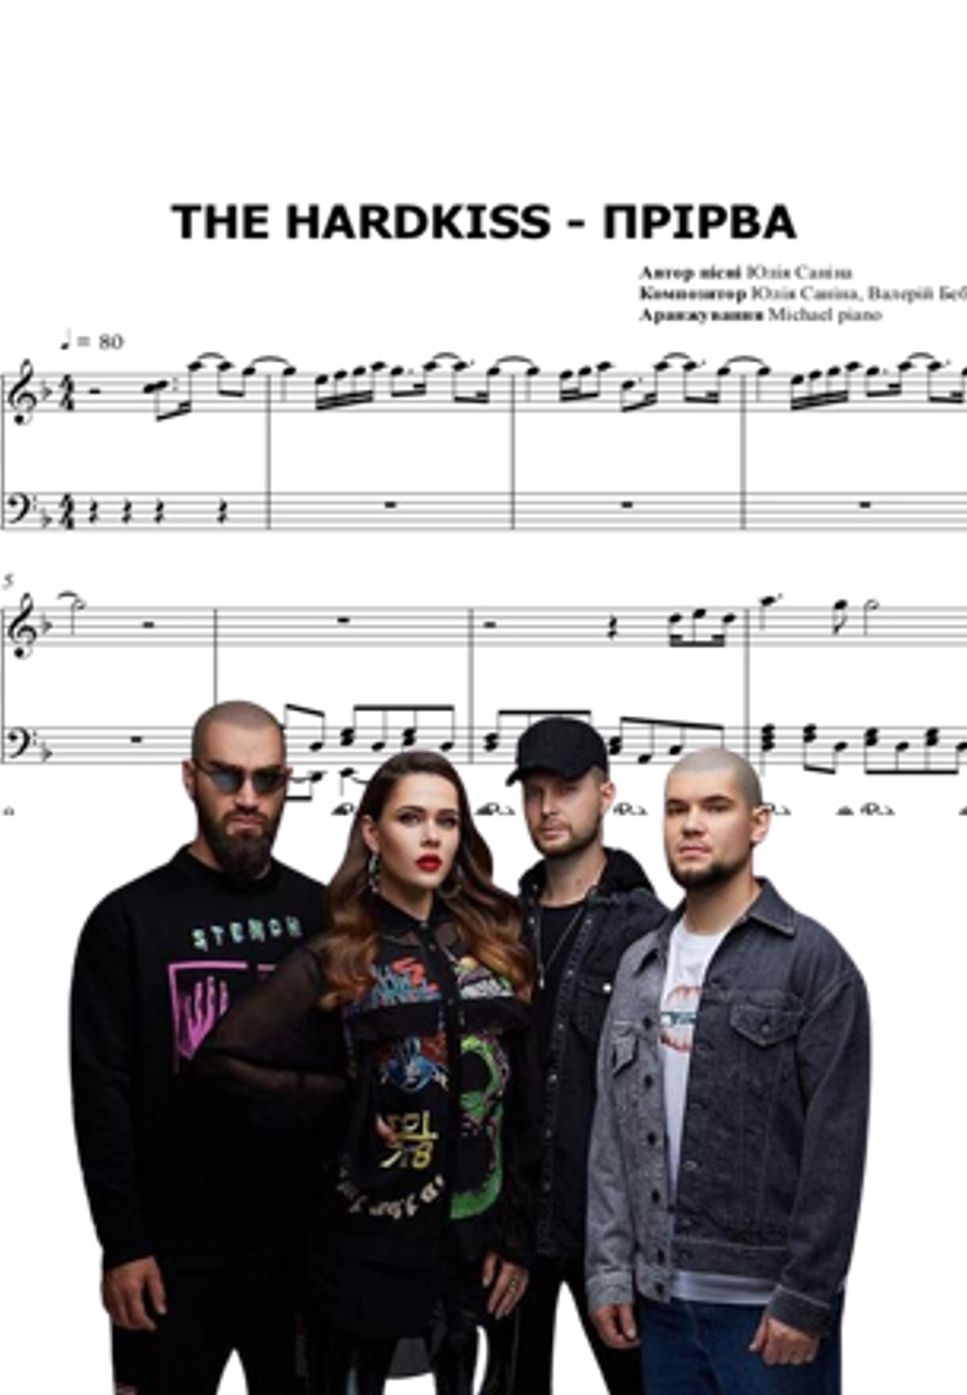 The Hardkiss - The Hardkiss - Прірва - by Michael Piano